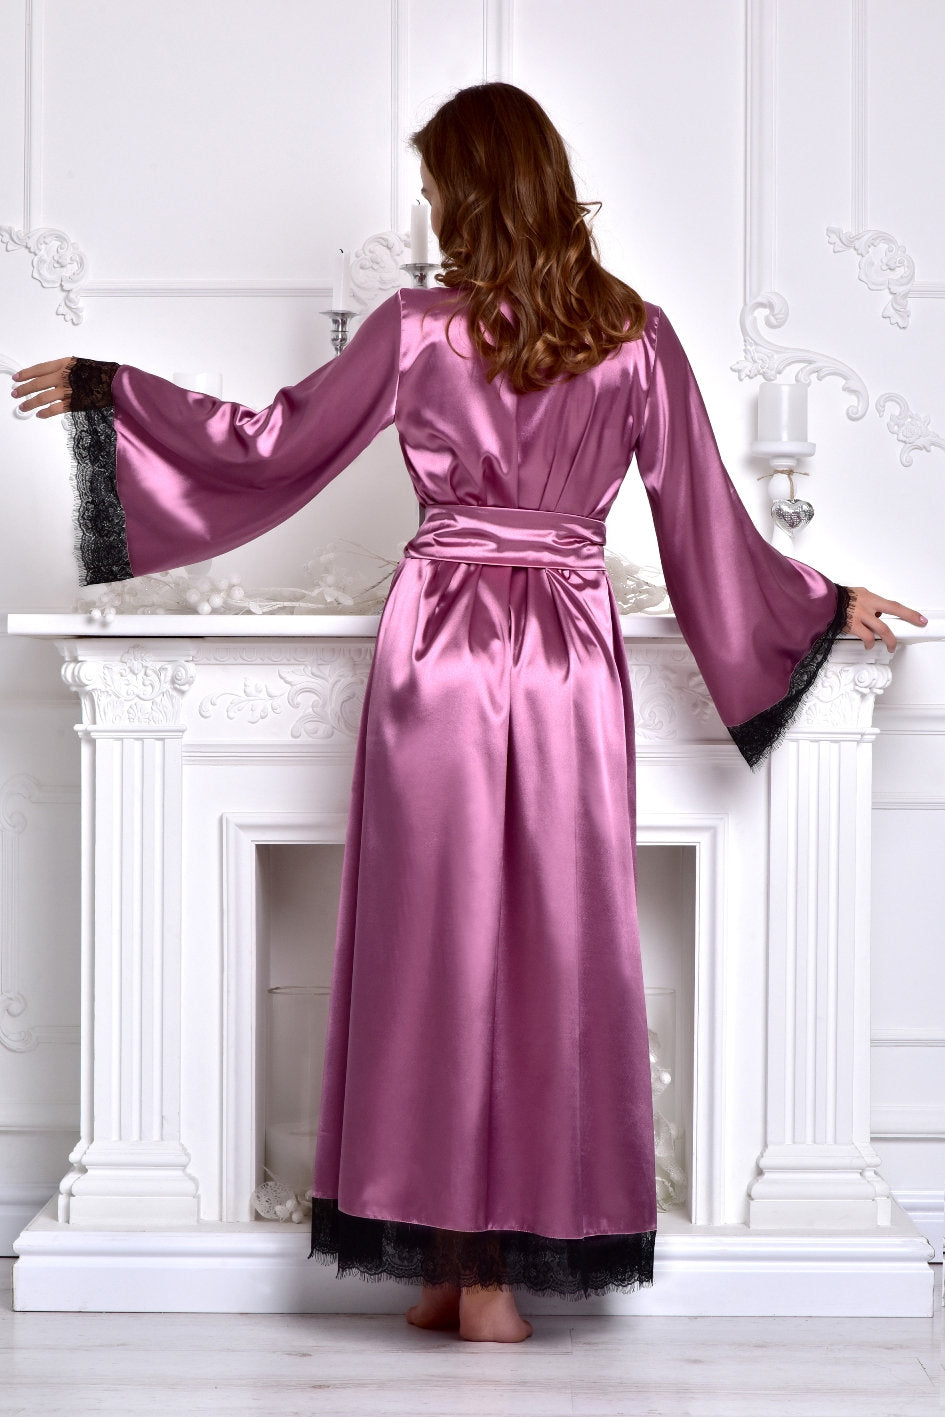 Bachelorette Party Loungewear - A Perfect Gift for a Captivating Evening